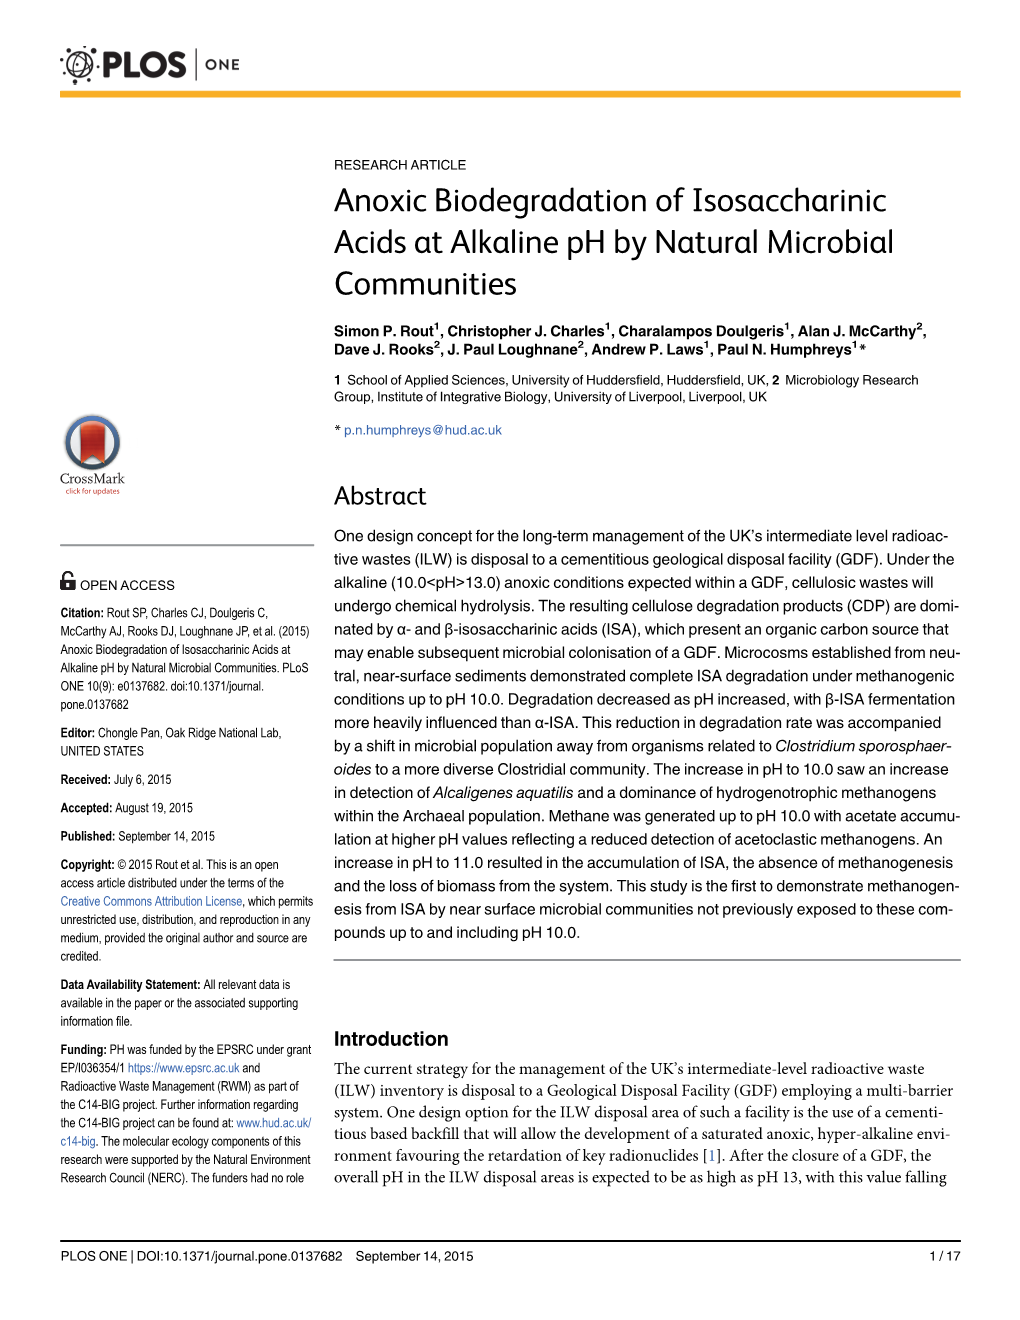 Anoxic Biodegradation of Isosaccharinic Acids at Alkaline Ph by Natural Microbial Communities